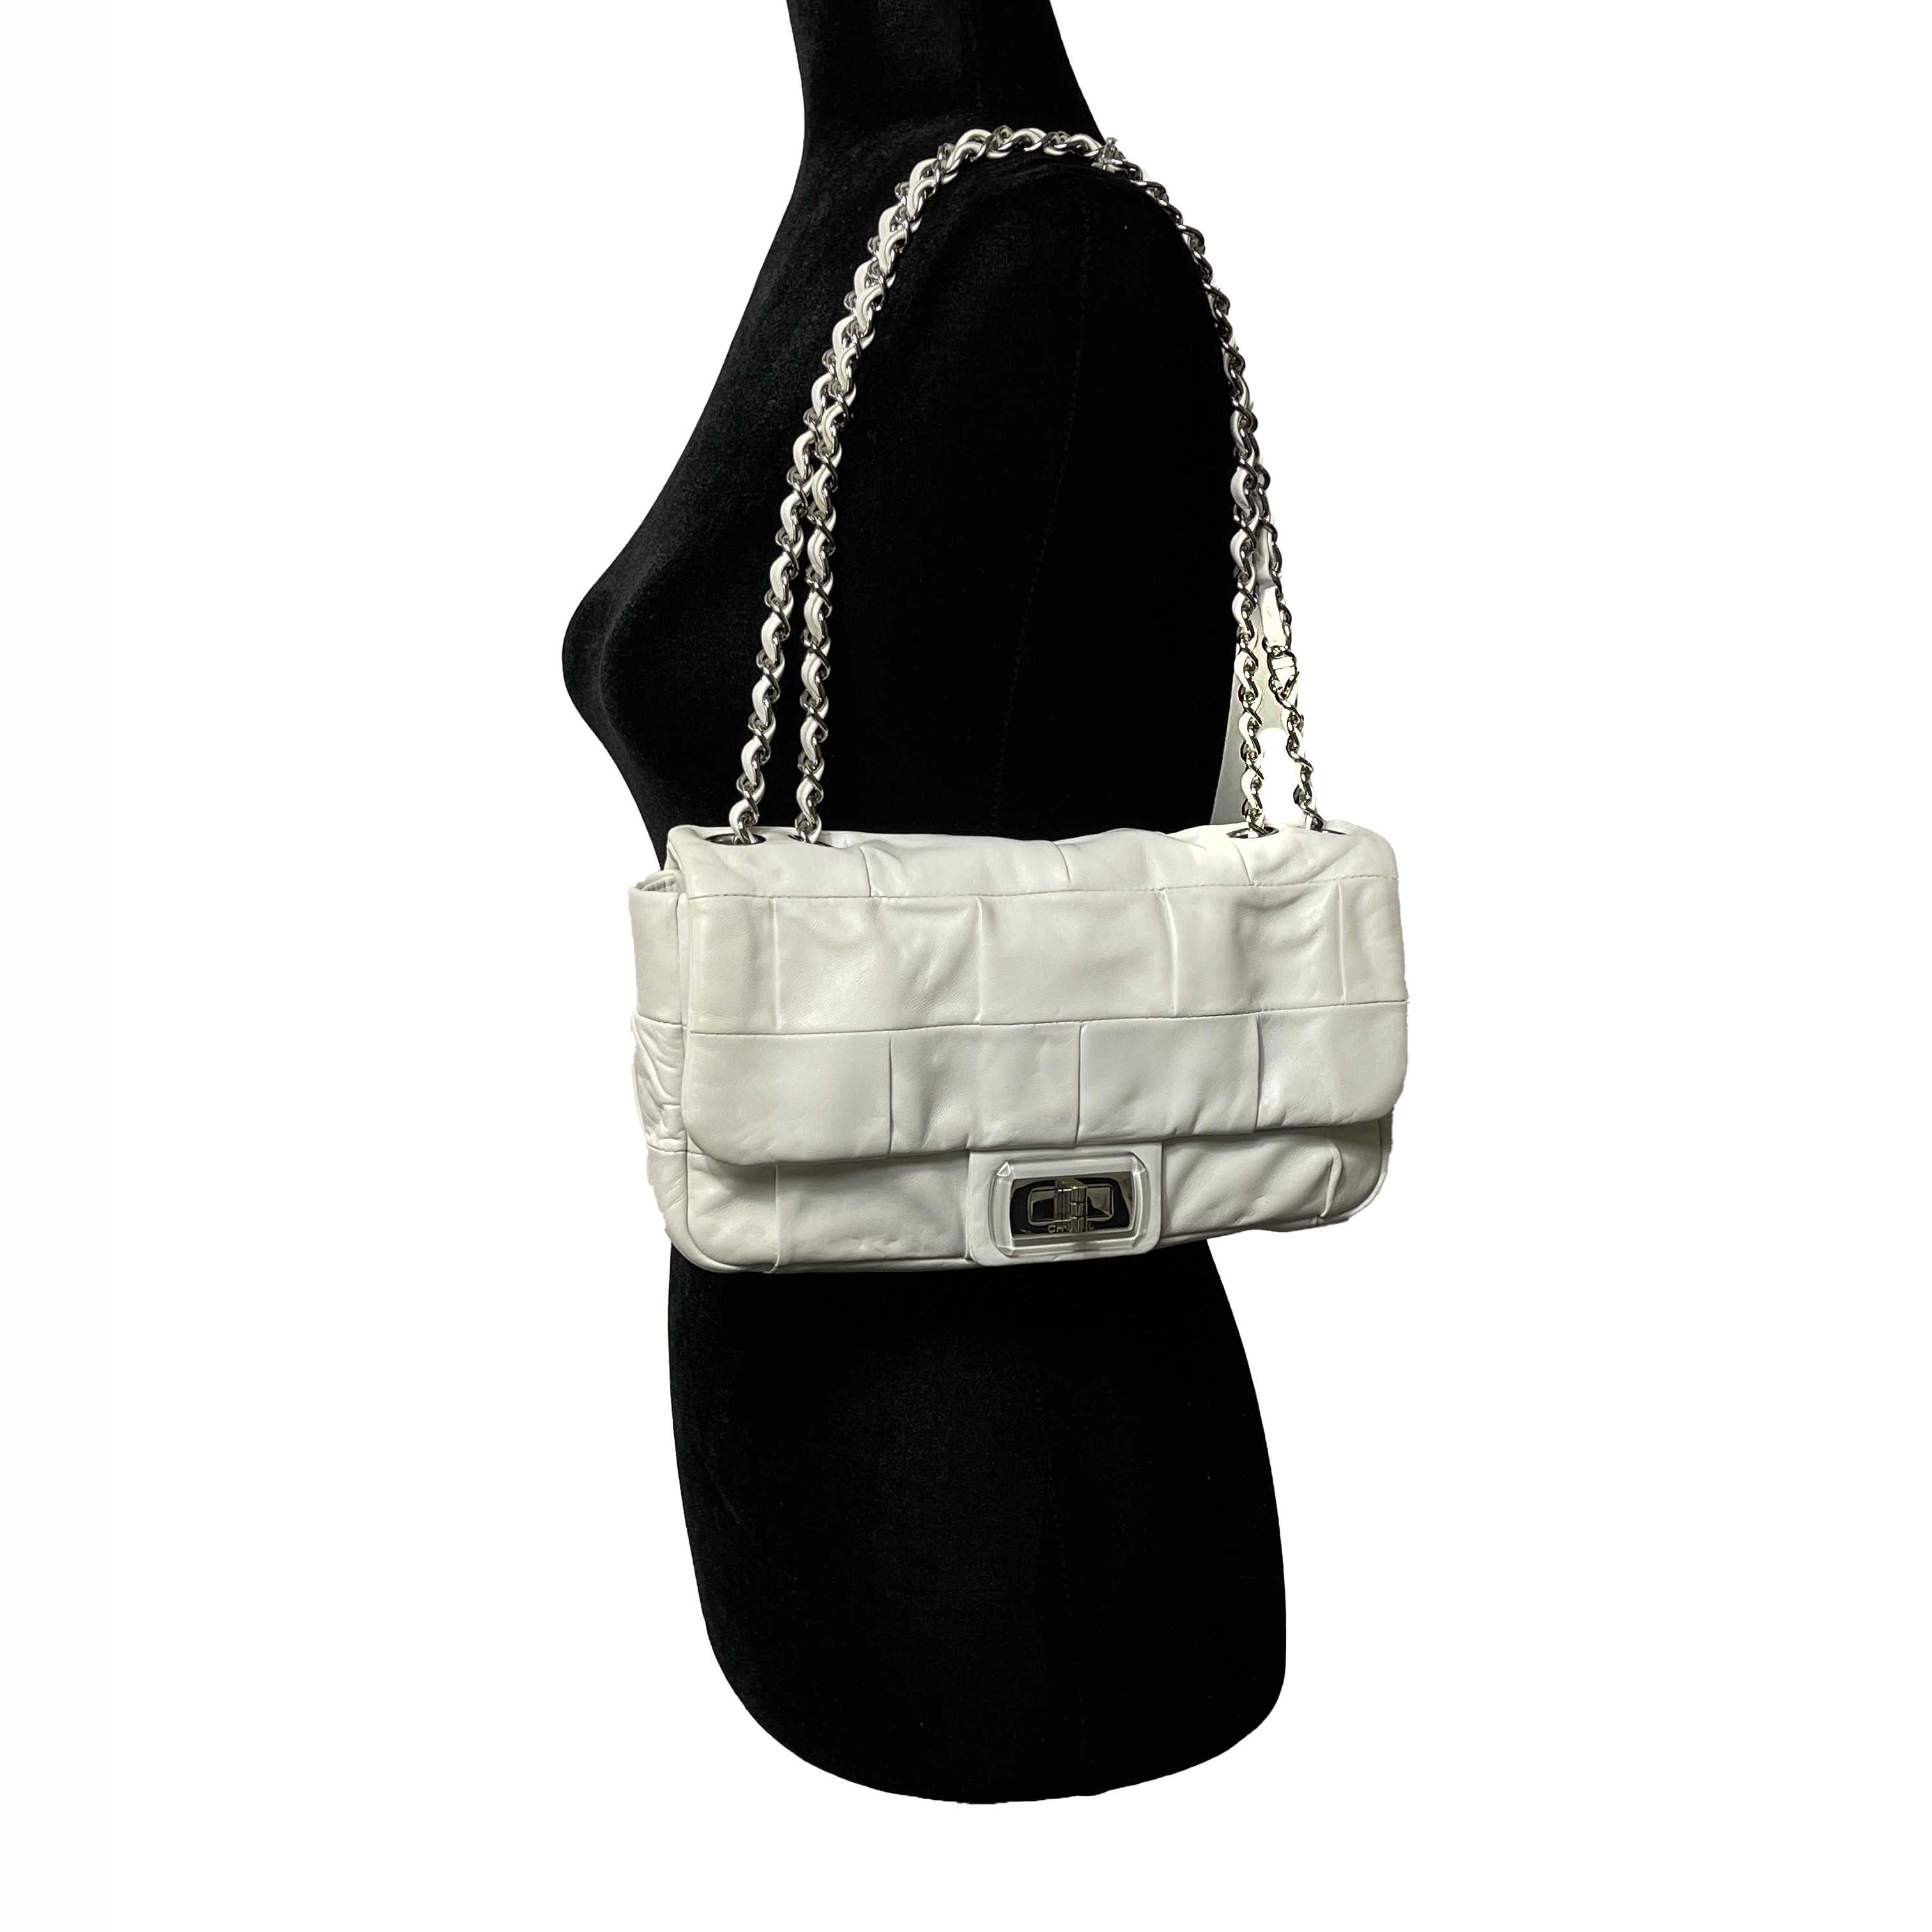 CHANEL White Lambskin Medium Mademoiselle Lock  Igloo Flap Shoulder Bag In Excellent Condition For Sale In Sanford, FL